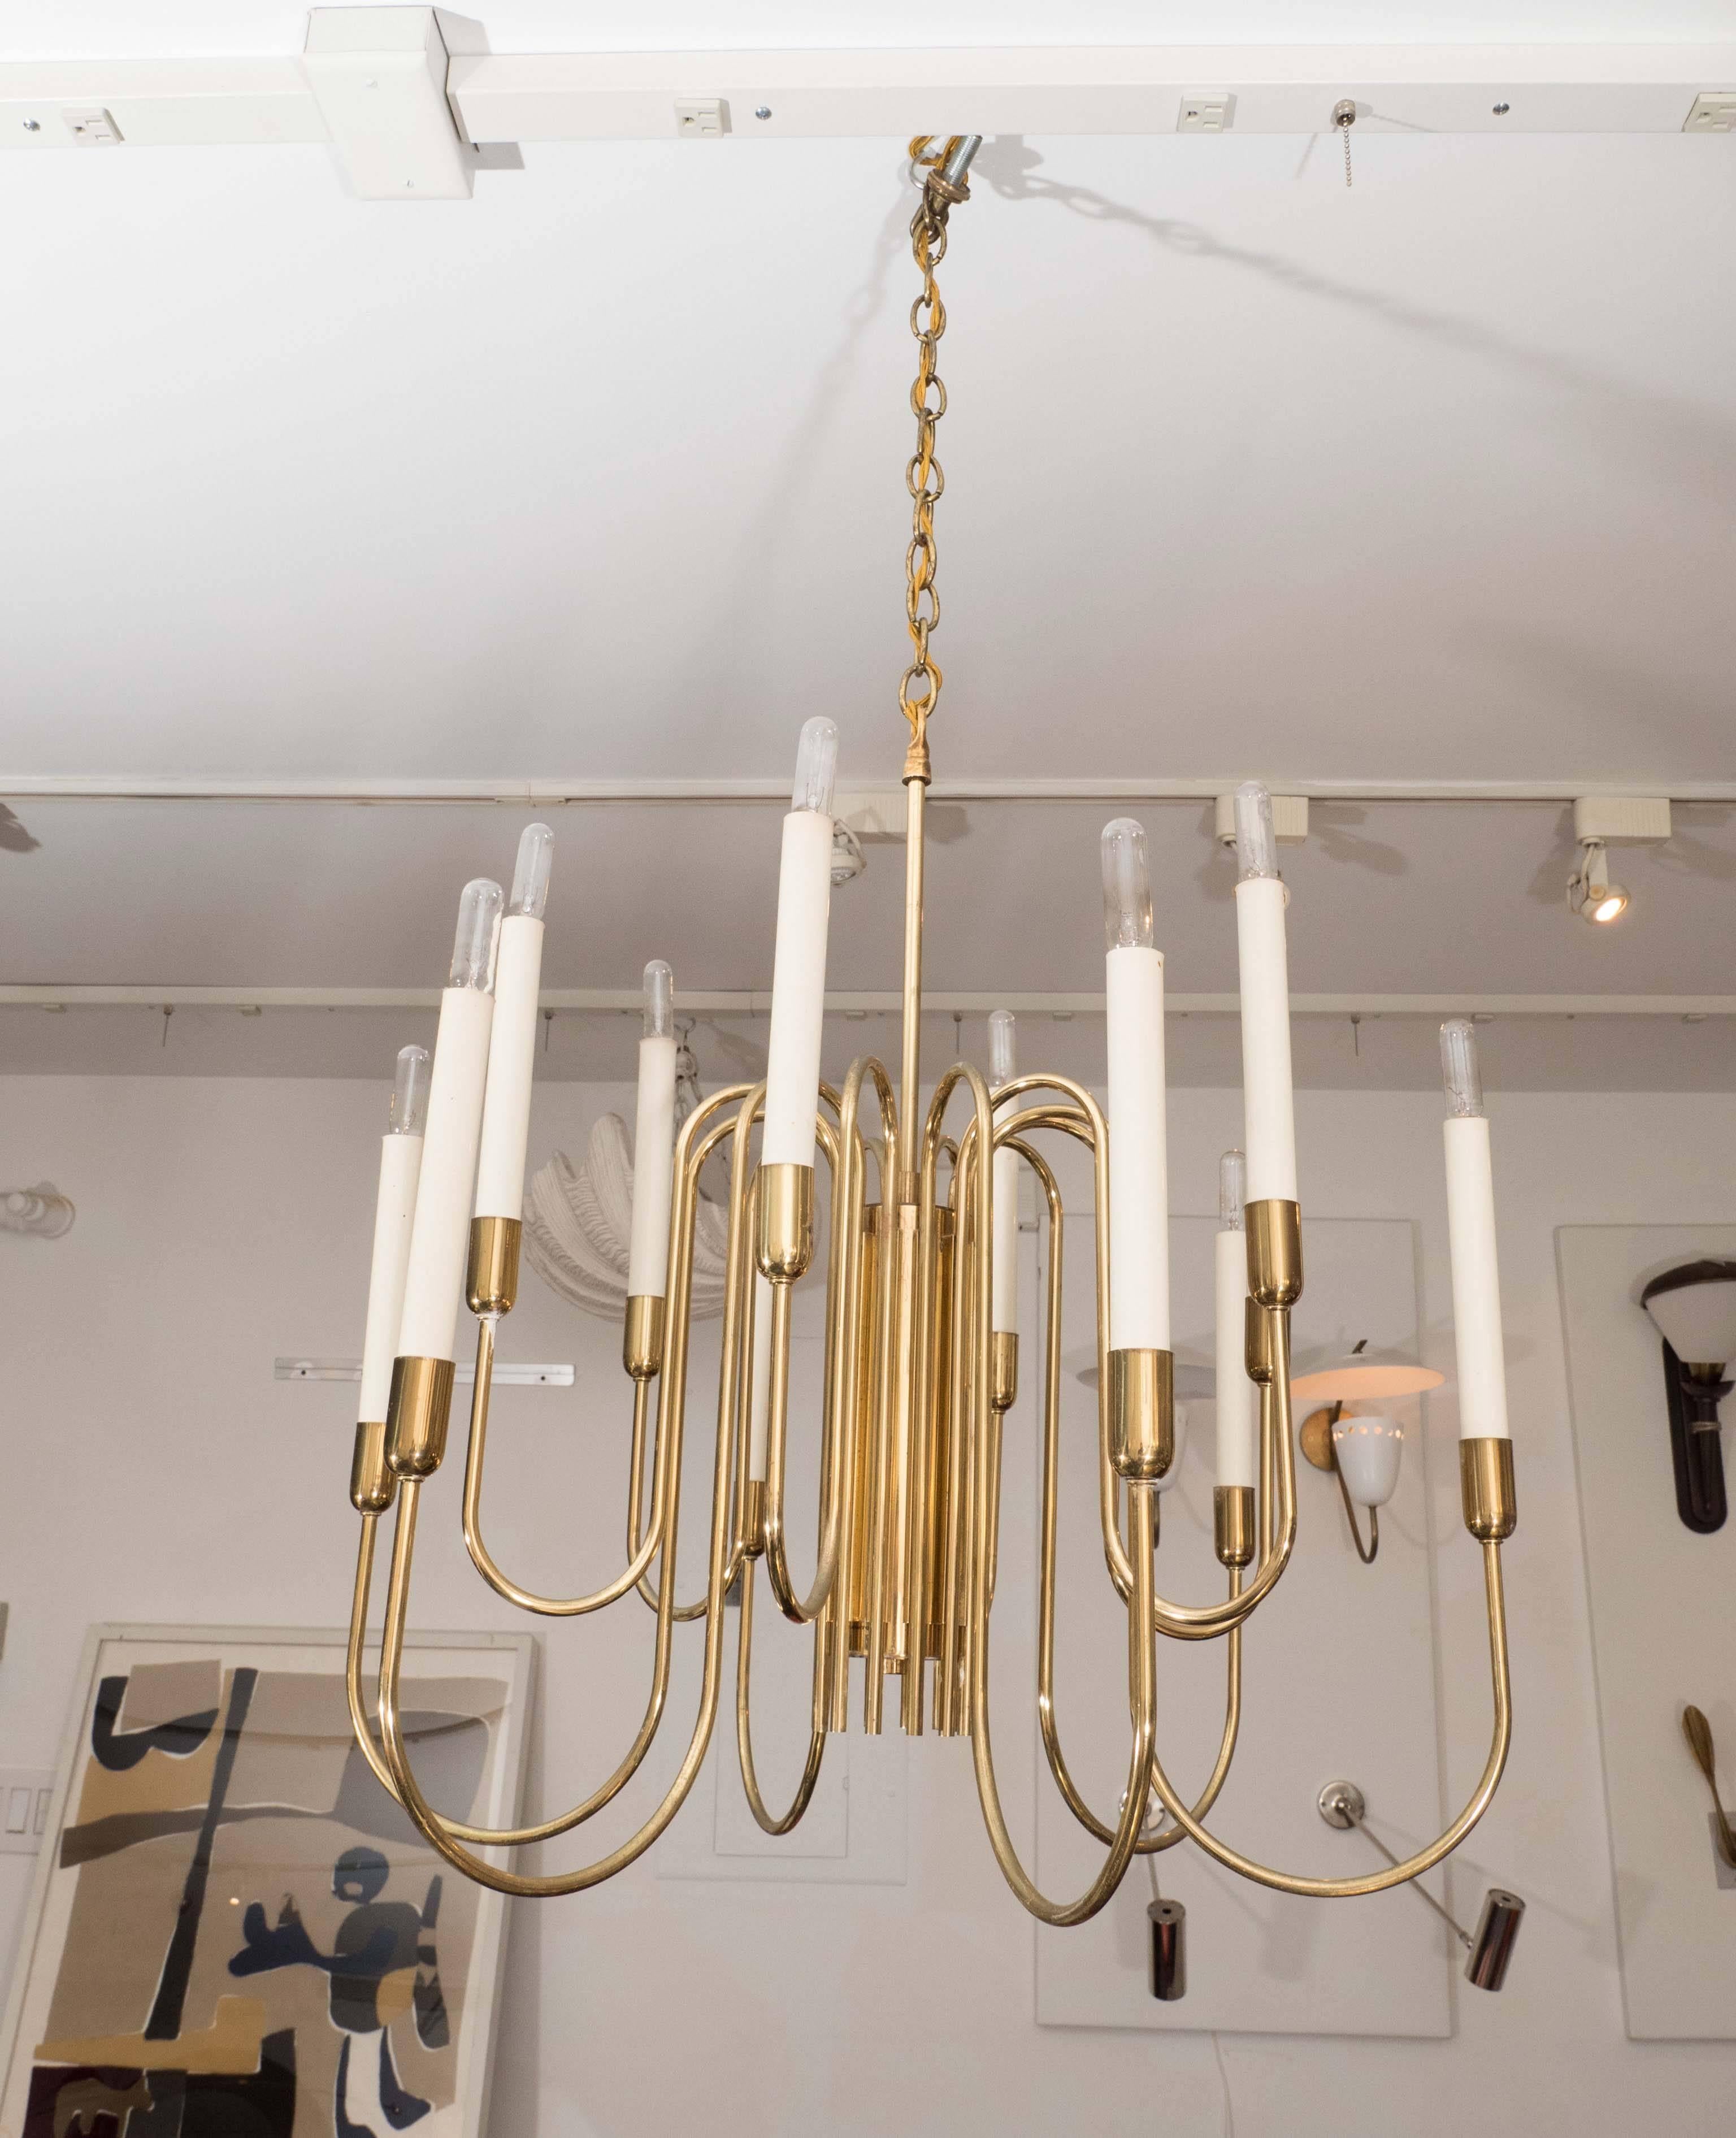 Italian chandelier with 12 lights. Fully wired with original finish.